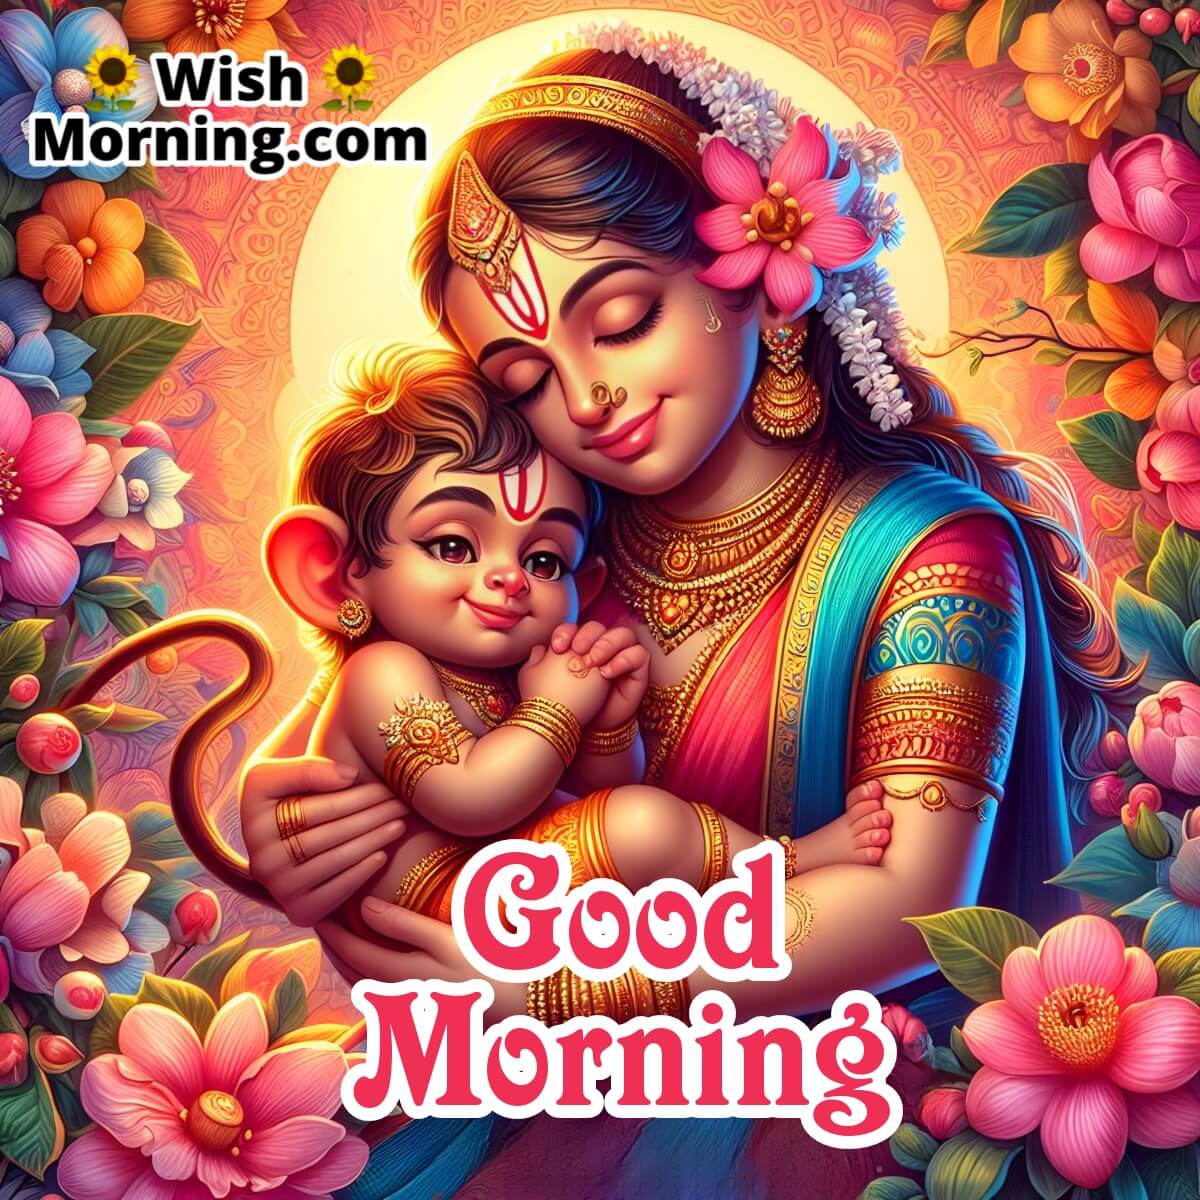 Hanuman's Tender Morning With Mother